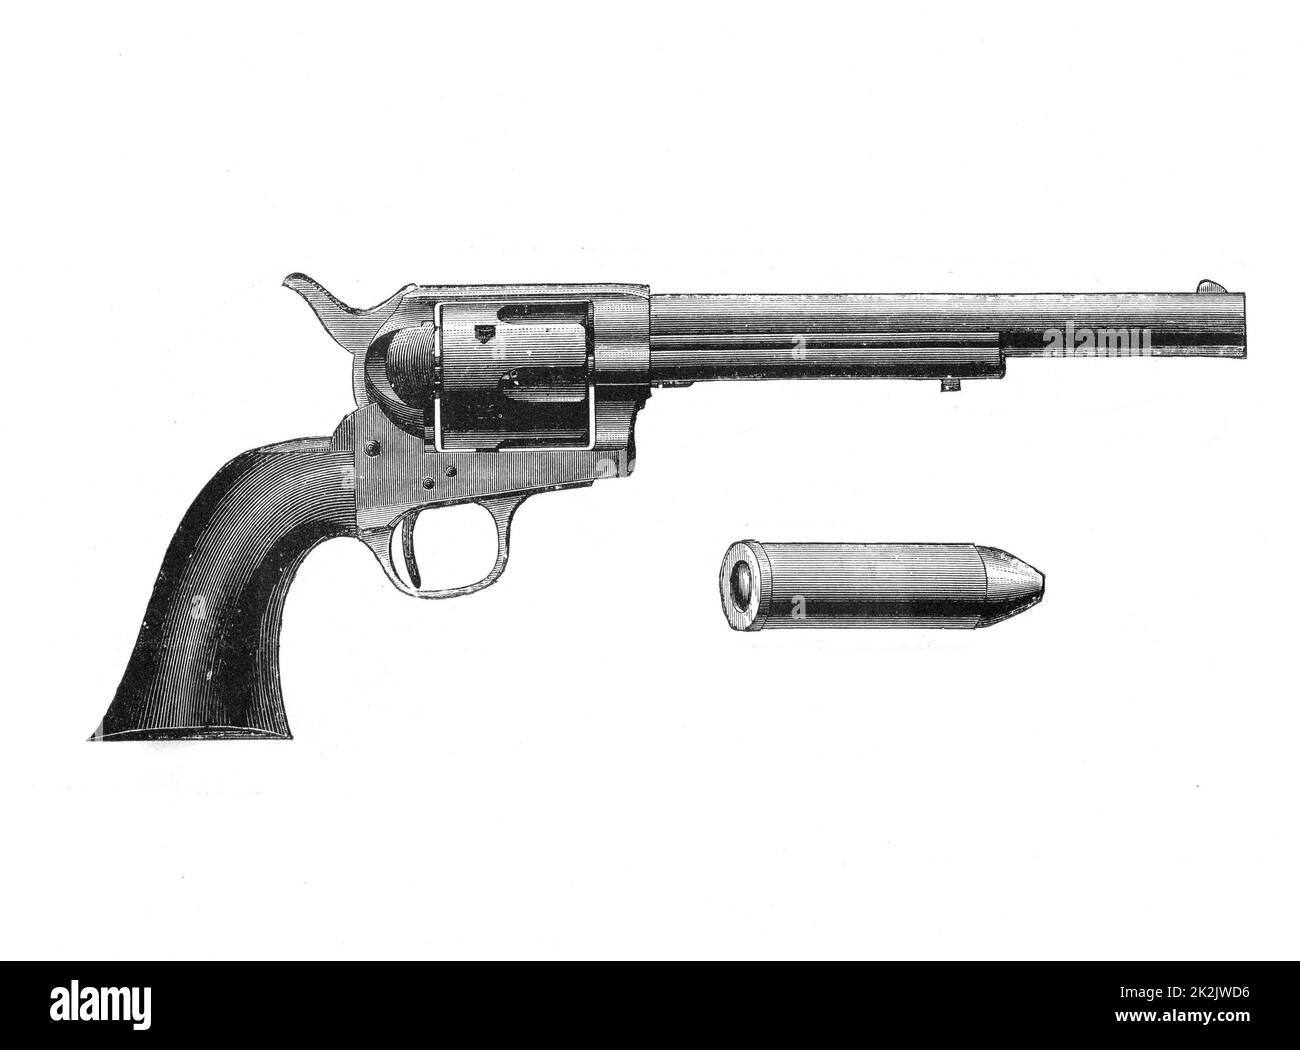 Colt 'Frontier' revolver. Also known as the Colt 'Peacemaker'. After Mexican War of 1846-48, was adopted by the US Army. Engraving, c. 1890 Stock Photo